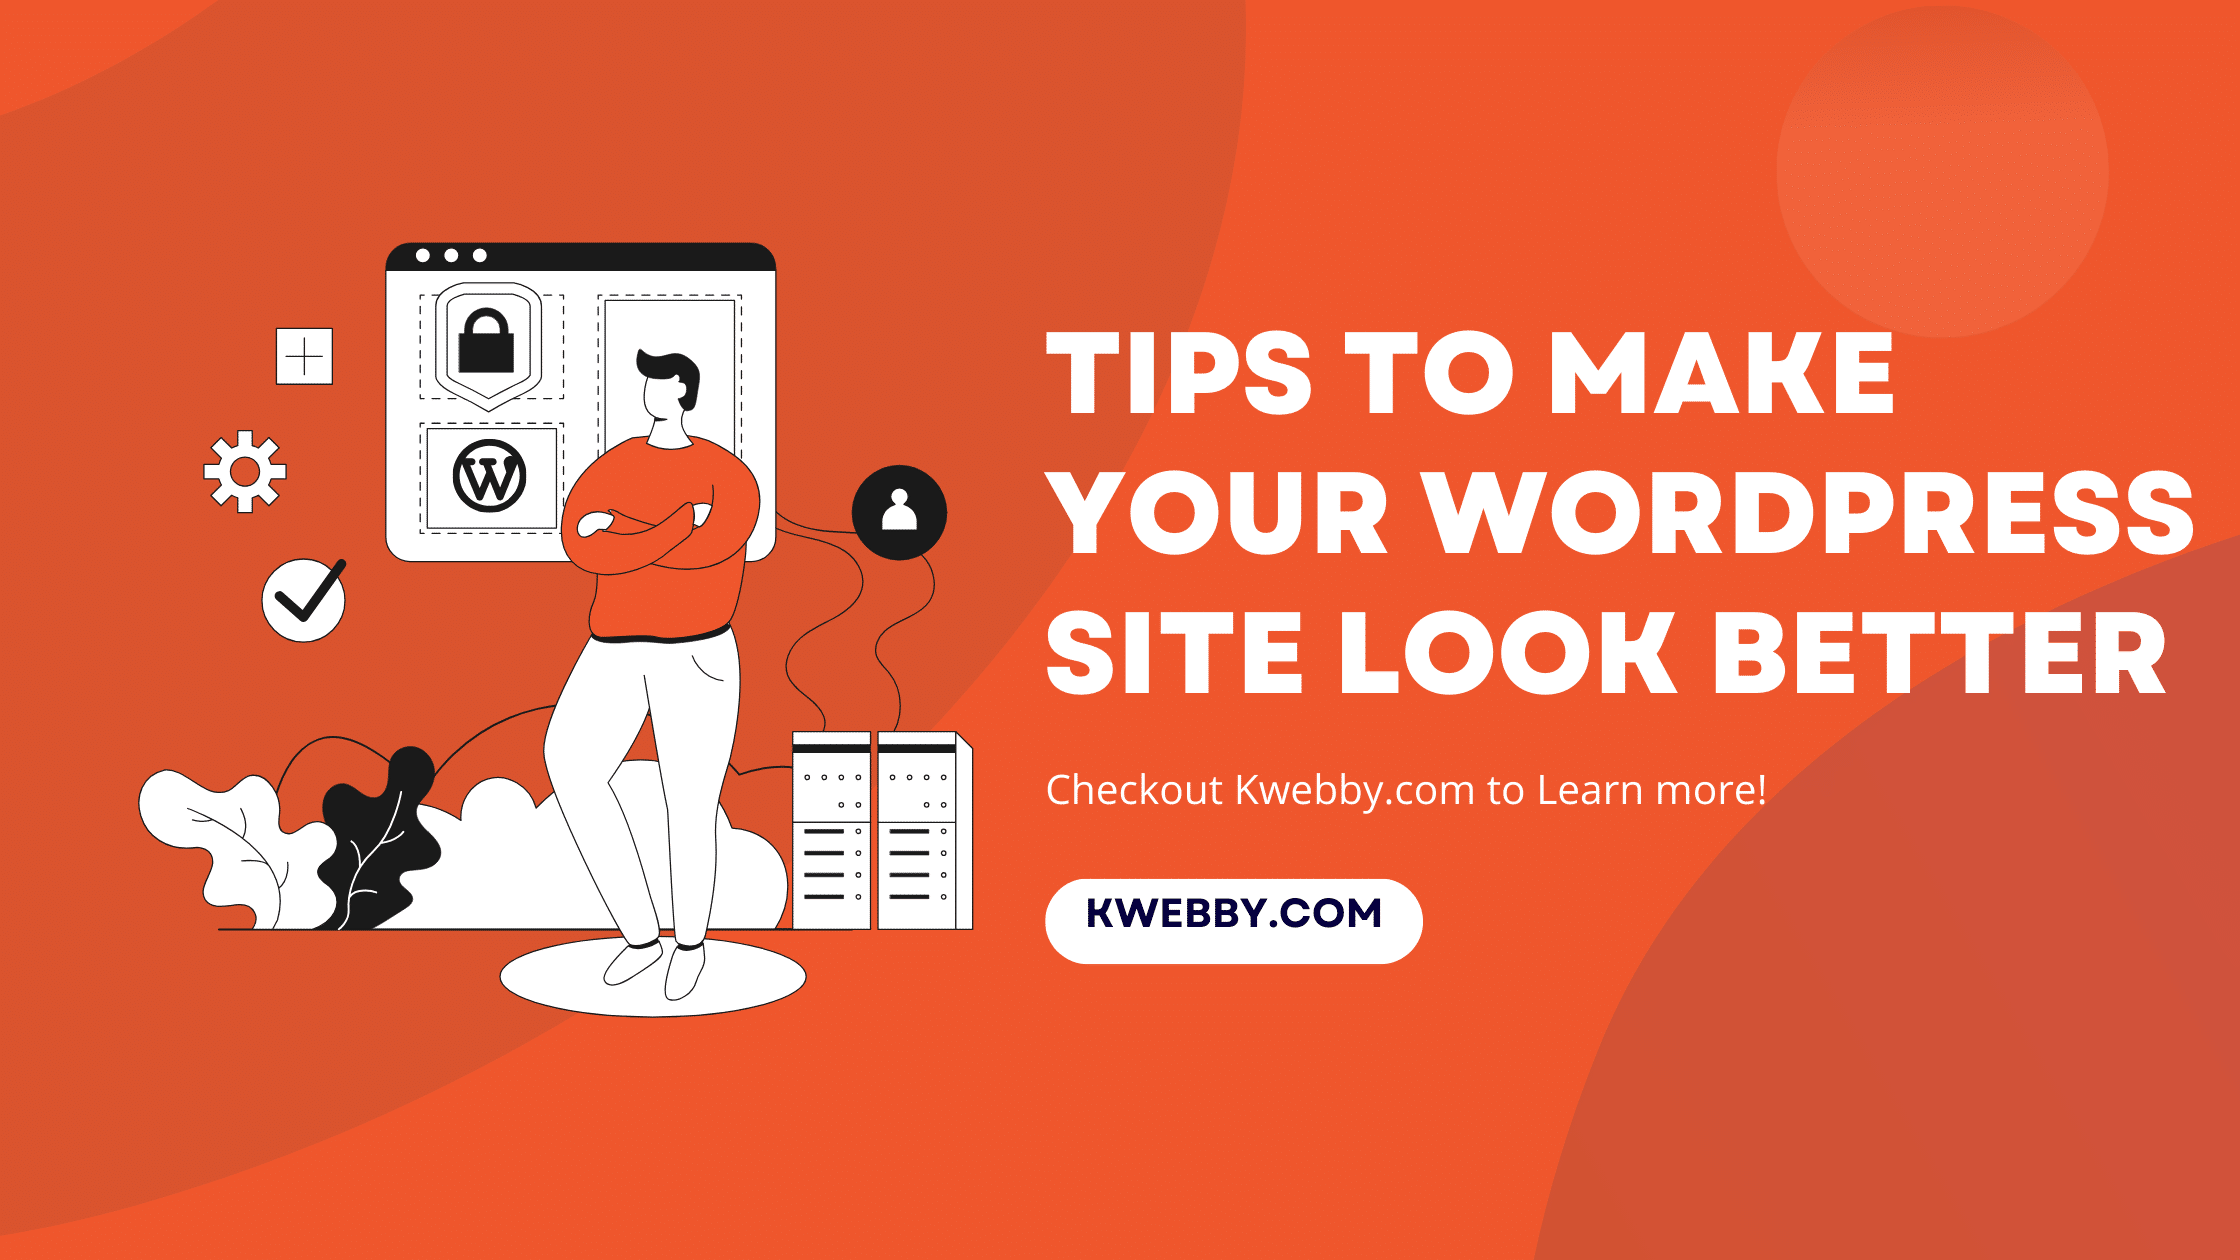 Tips to Make your WordPress Site Look Better